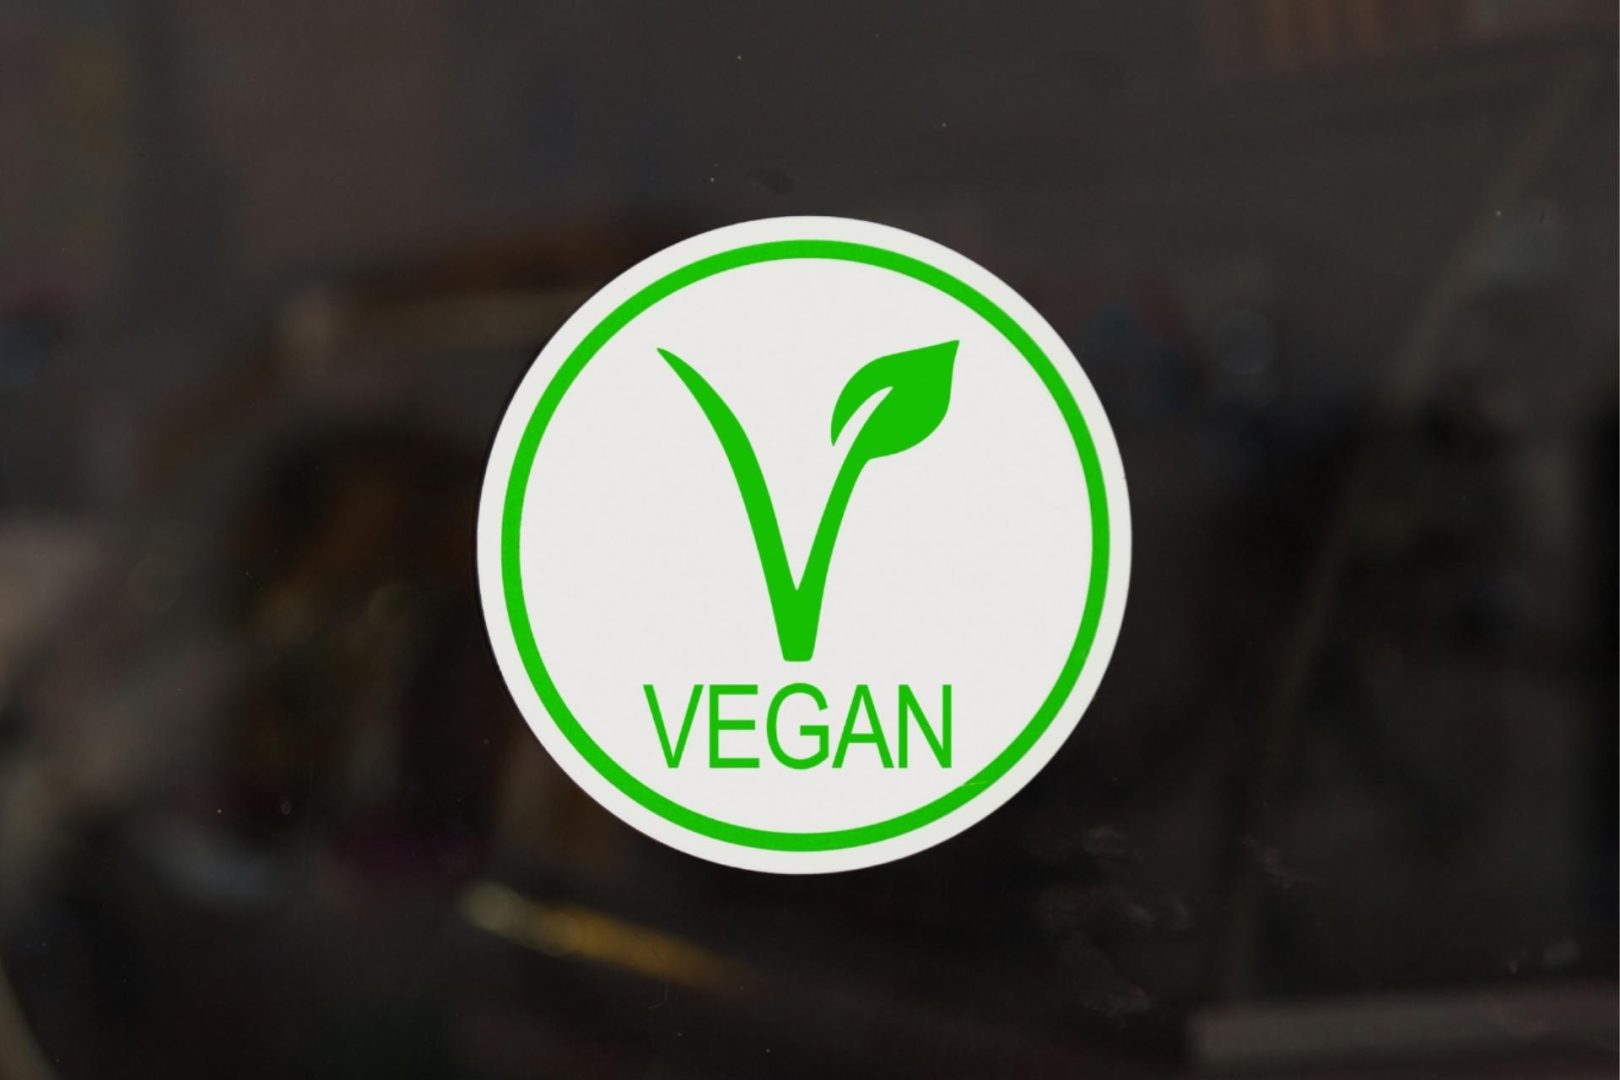 The green vegan logo in a white circle with a dark background around it.